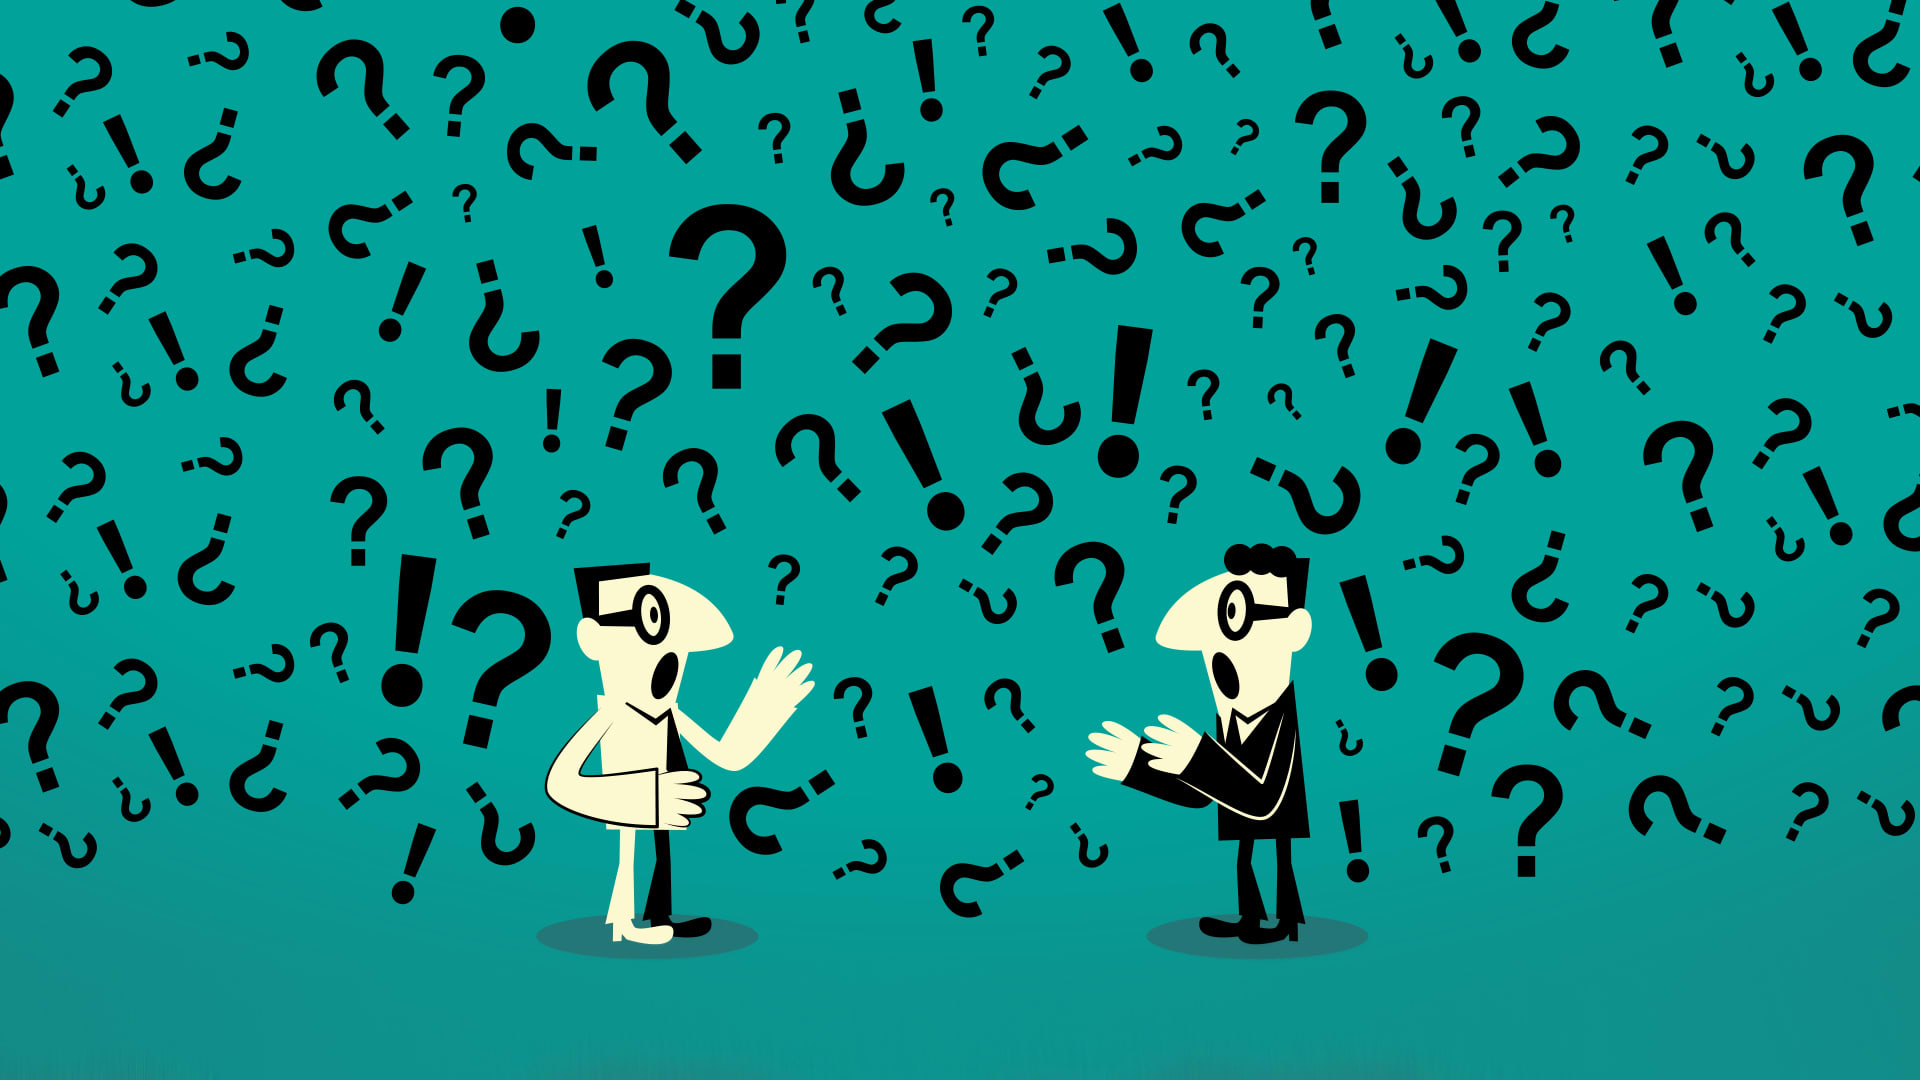 Illustration of two characters with question marks and exclamation marks